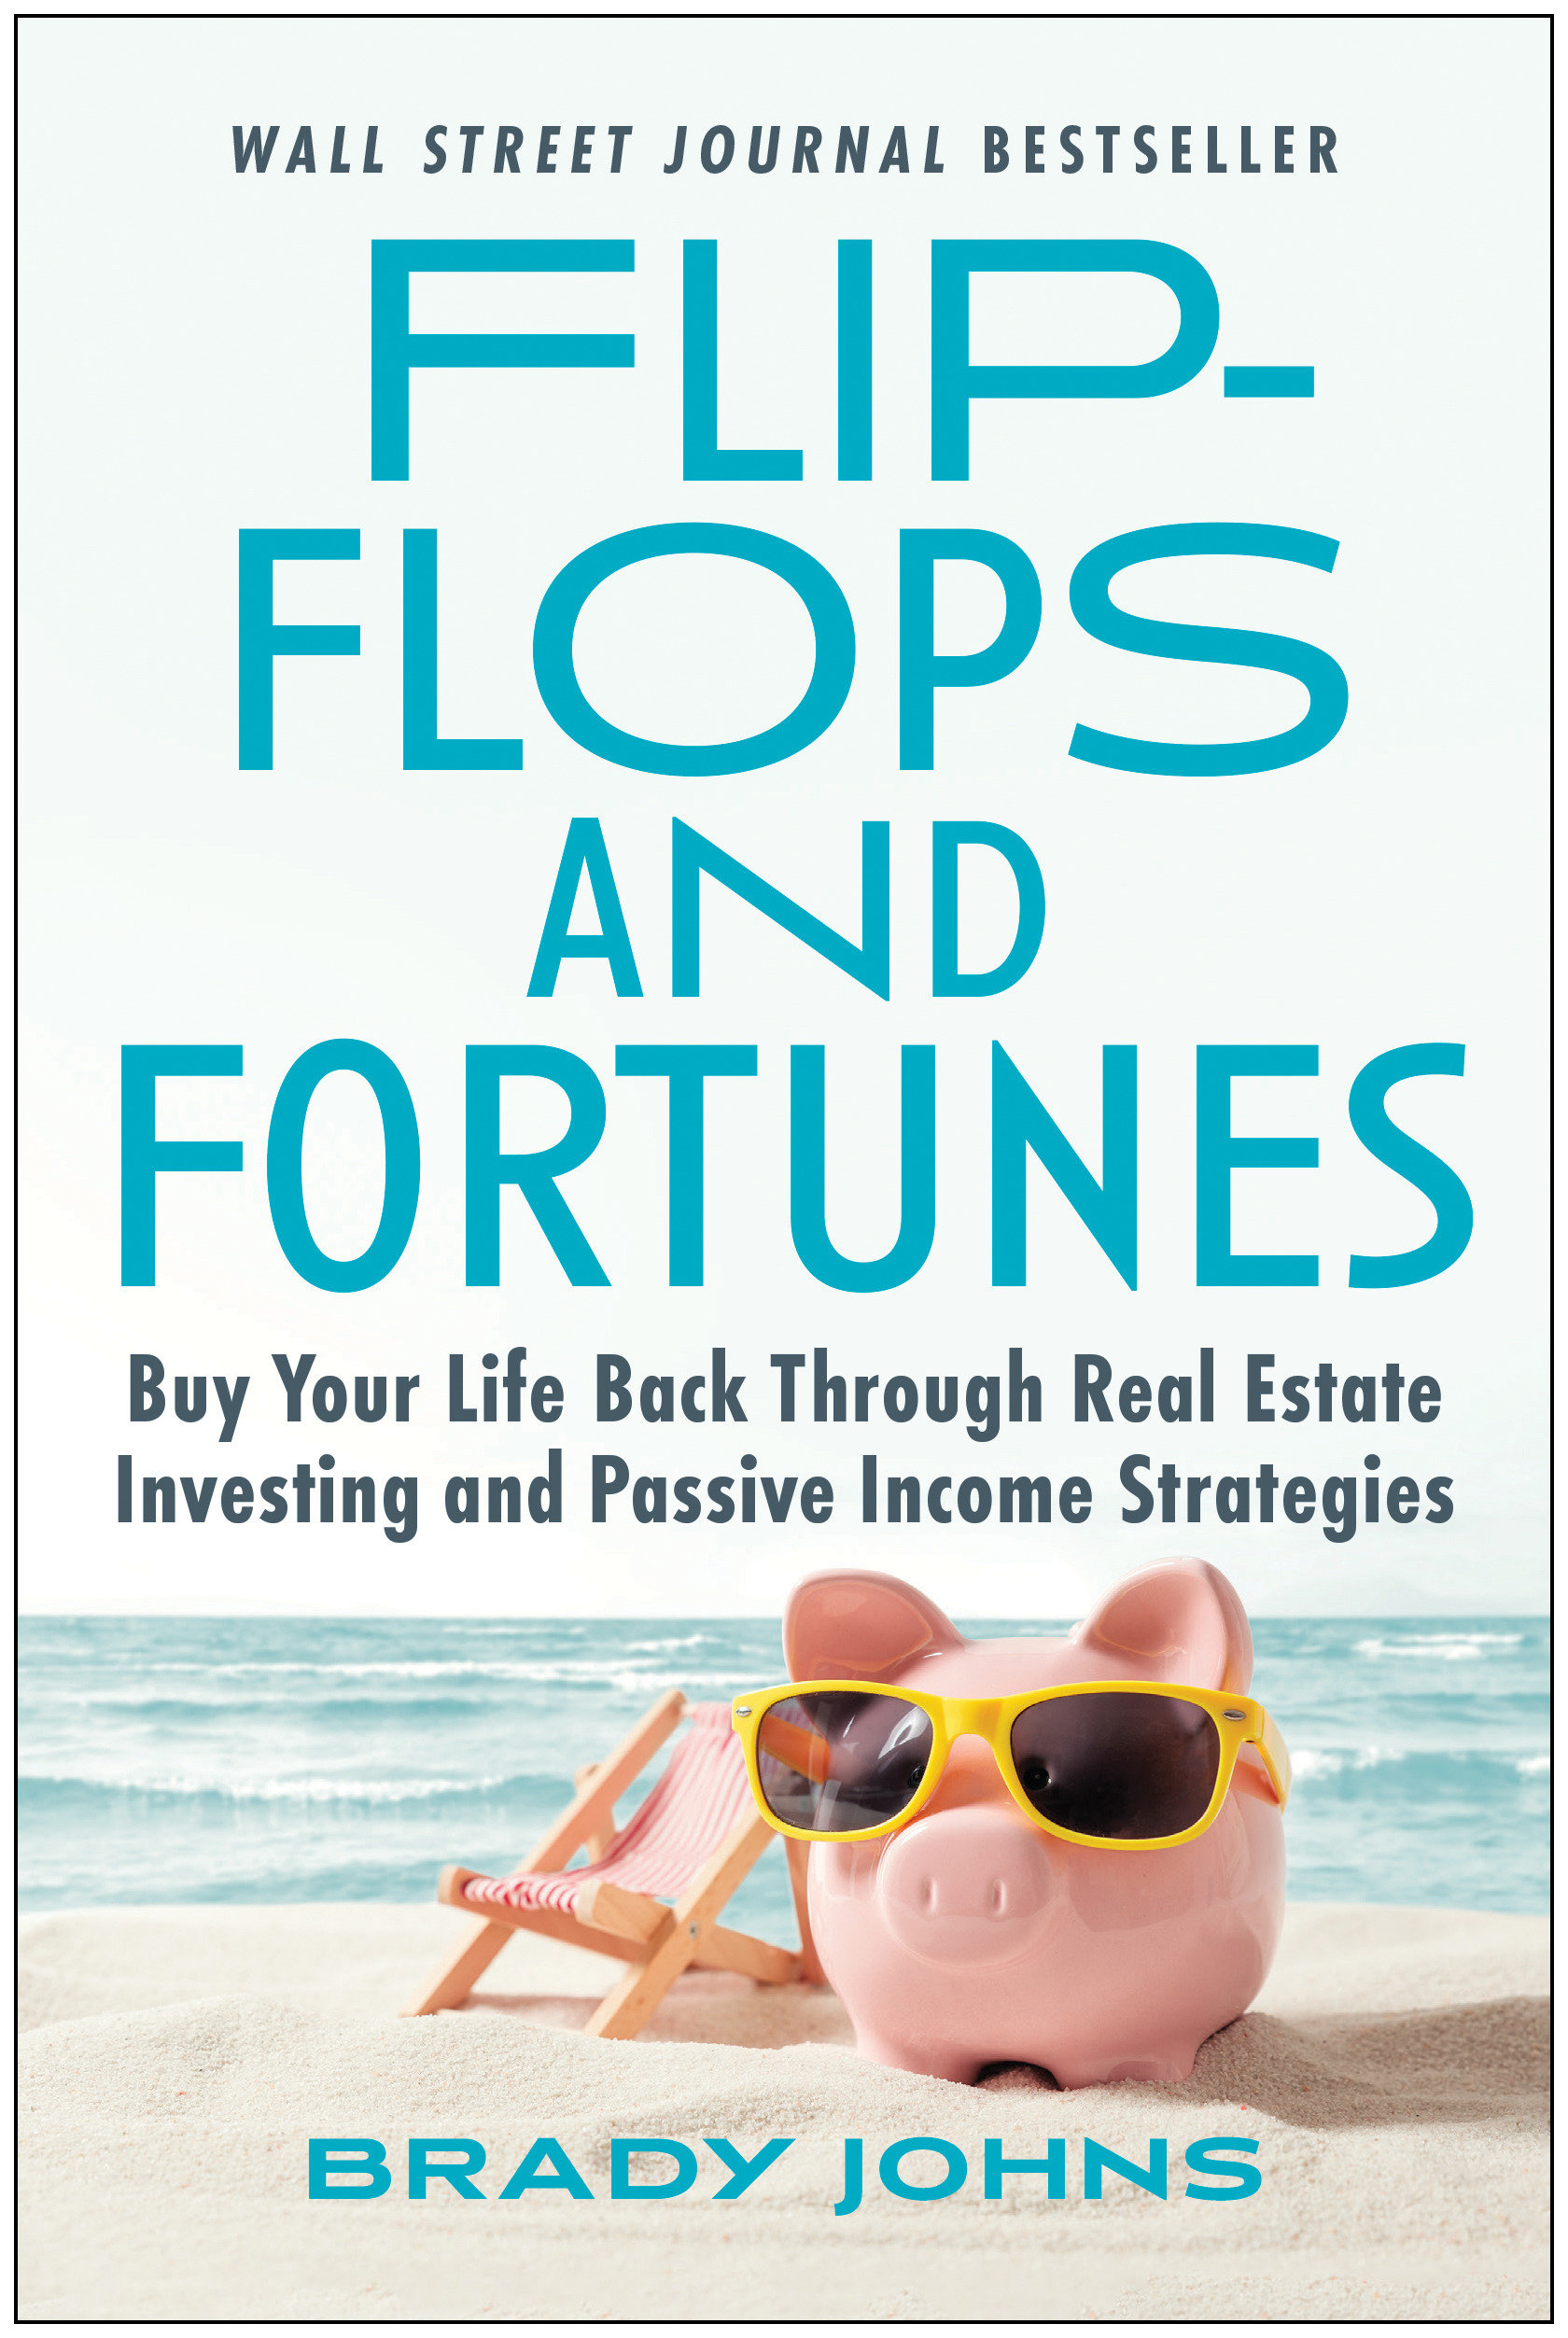 Flip-Flops And Fortunes (Hardcover Book)